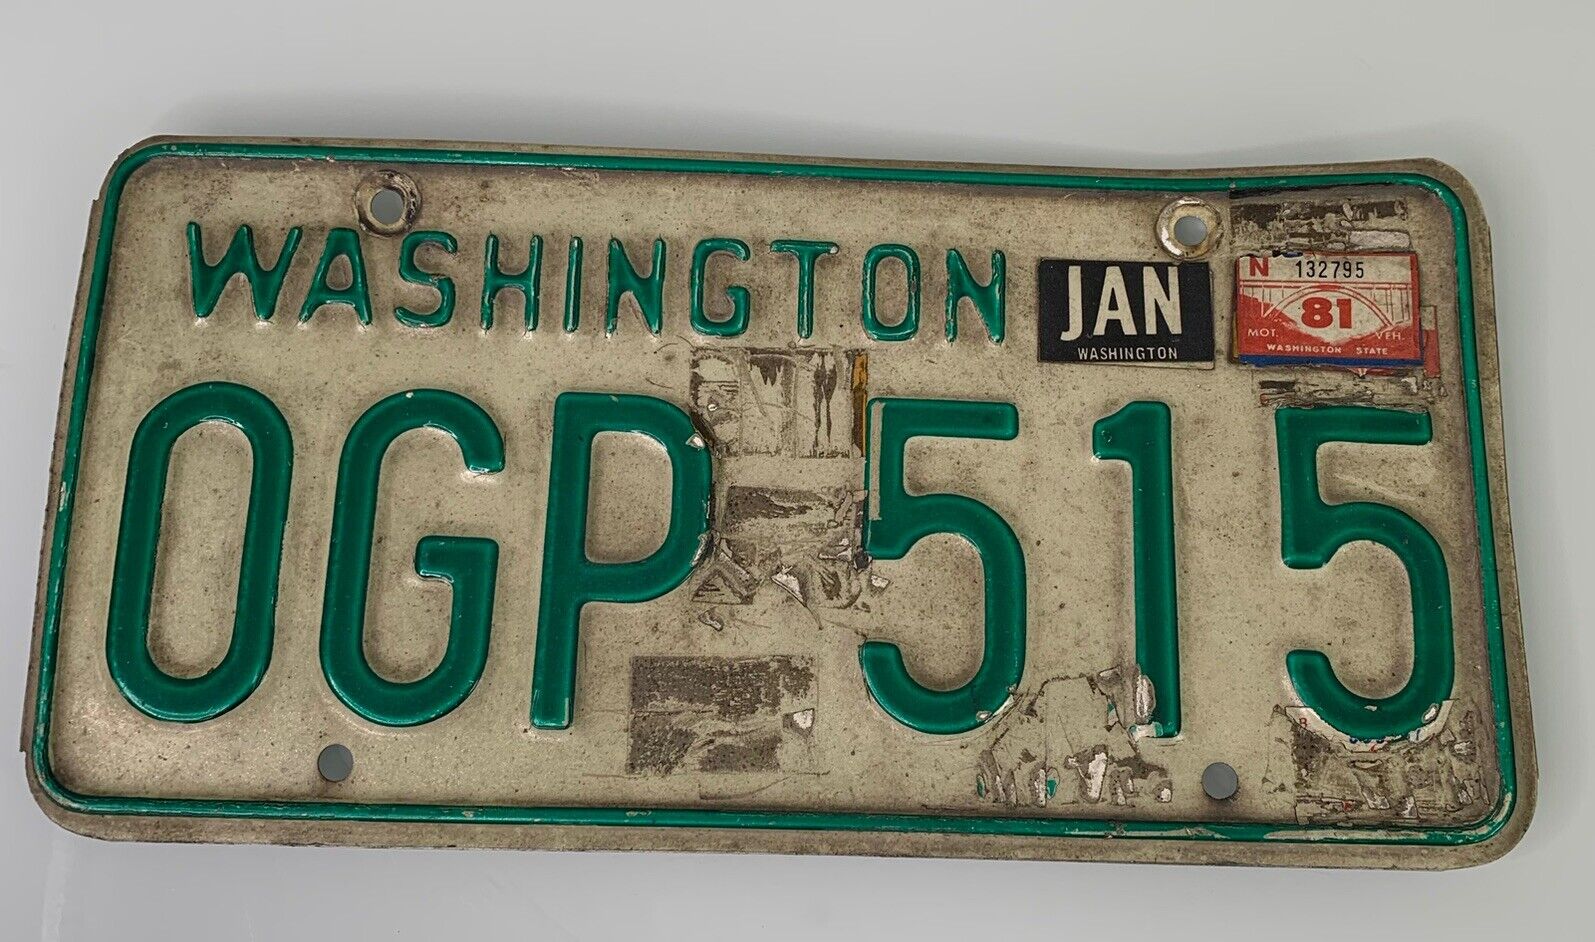 Vintage Washington LICENSE PLATE OGP515 Collectible White & Green Tags 1970’s.